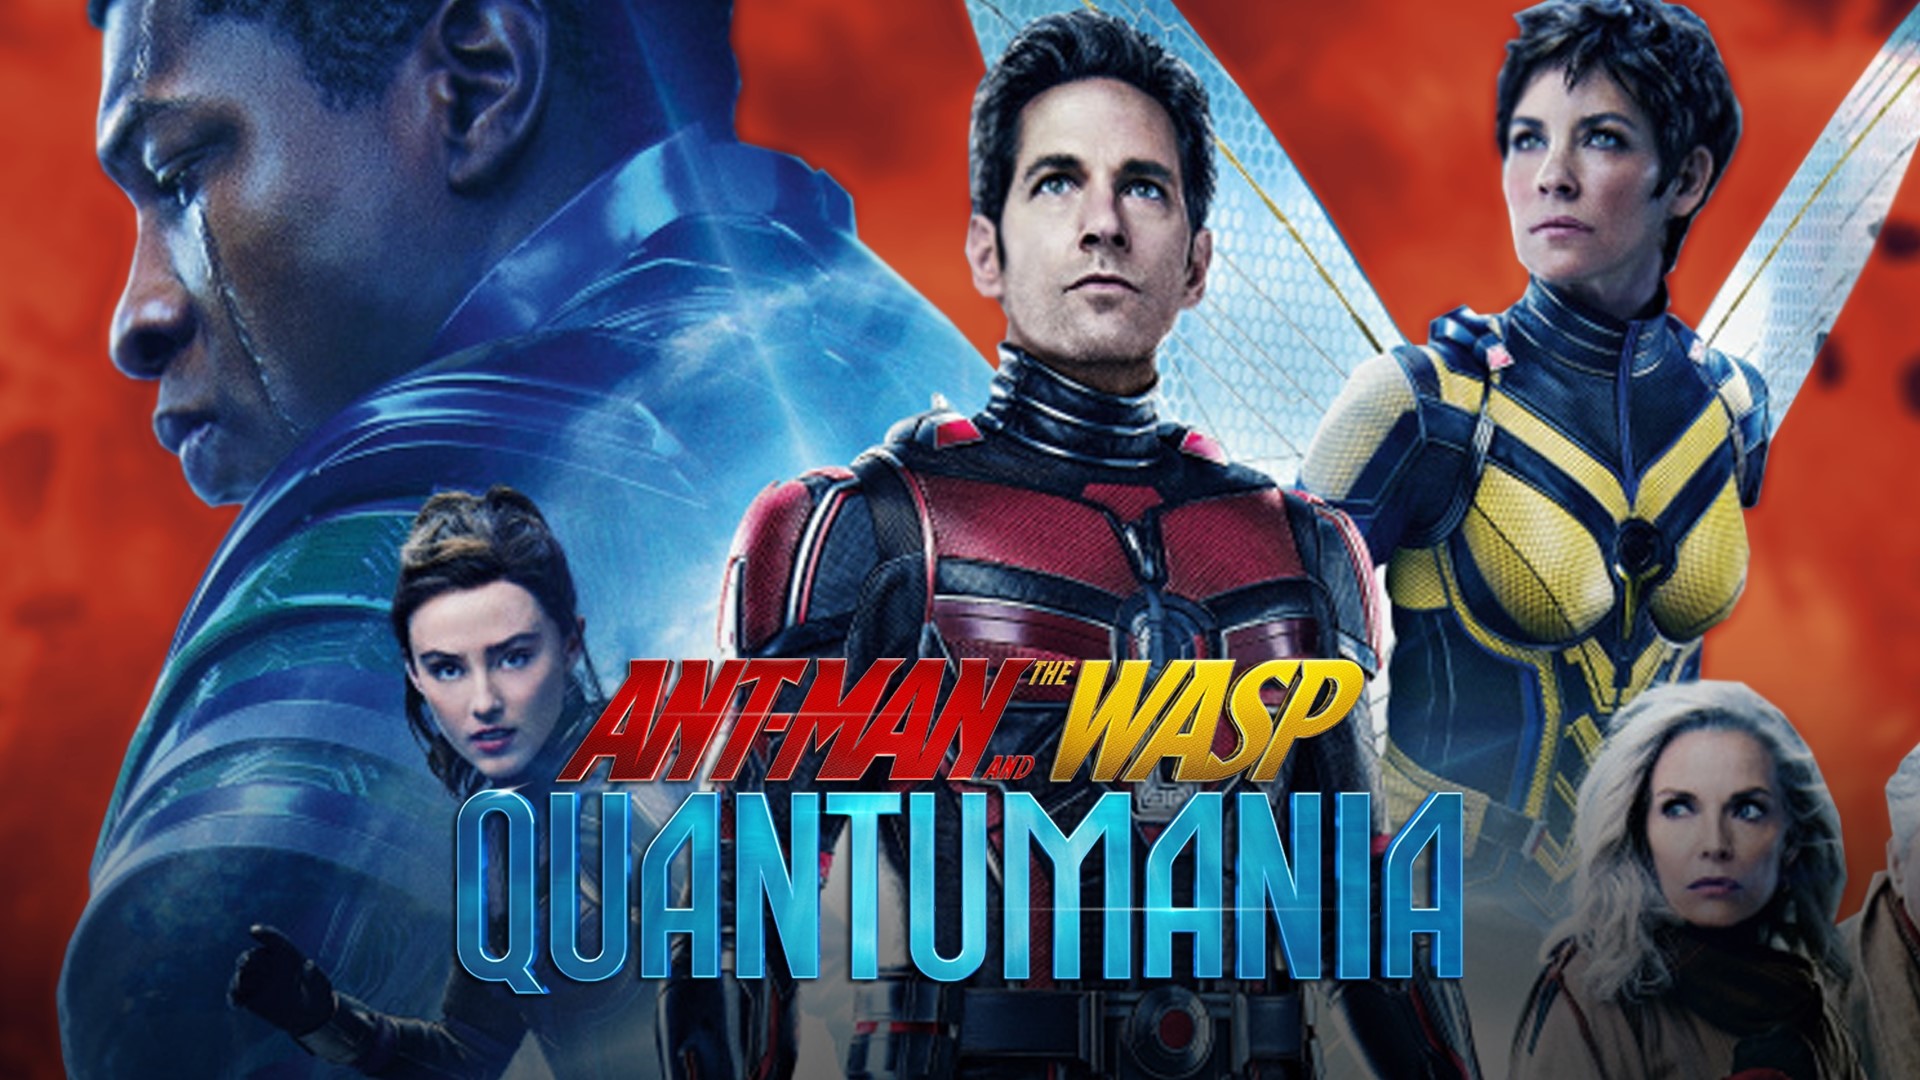 Although the third Ant-Man movie is a scatter shot of MCU content, Johnathan Majors and Paul Rudd carry the movie over the finish line with their performances.